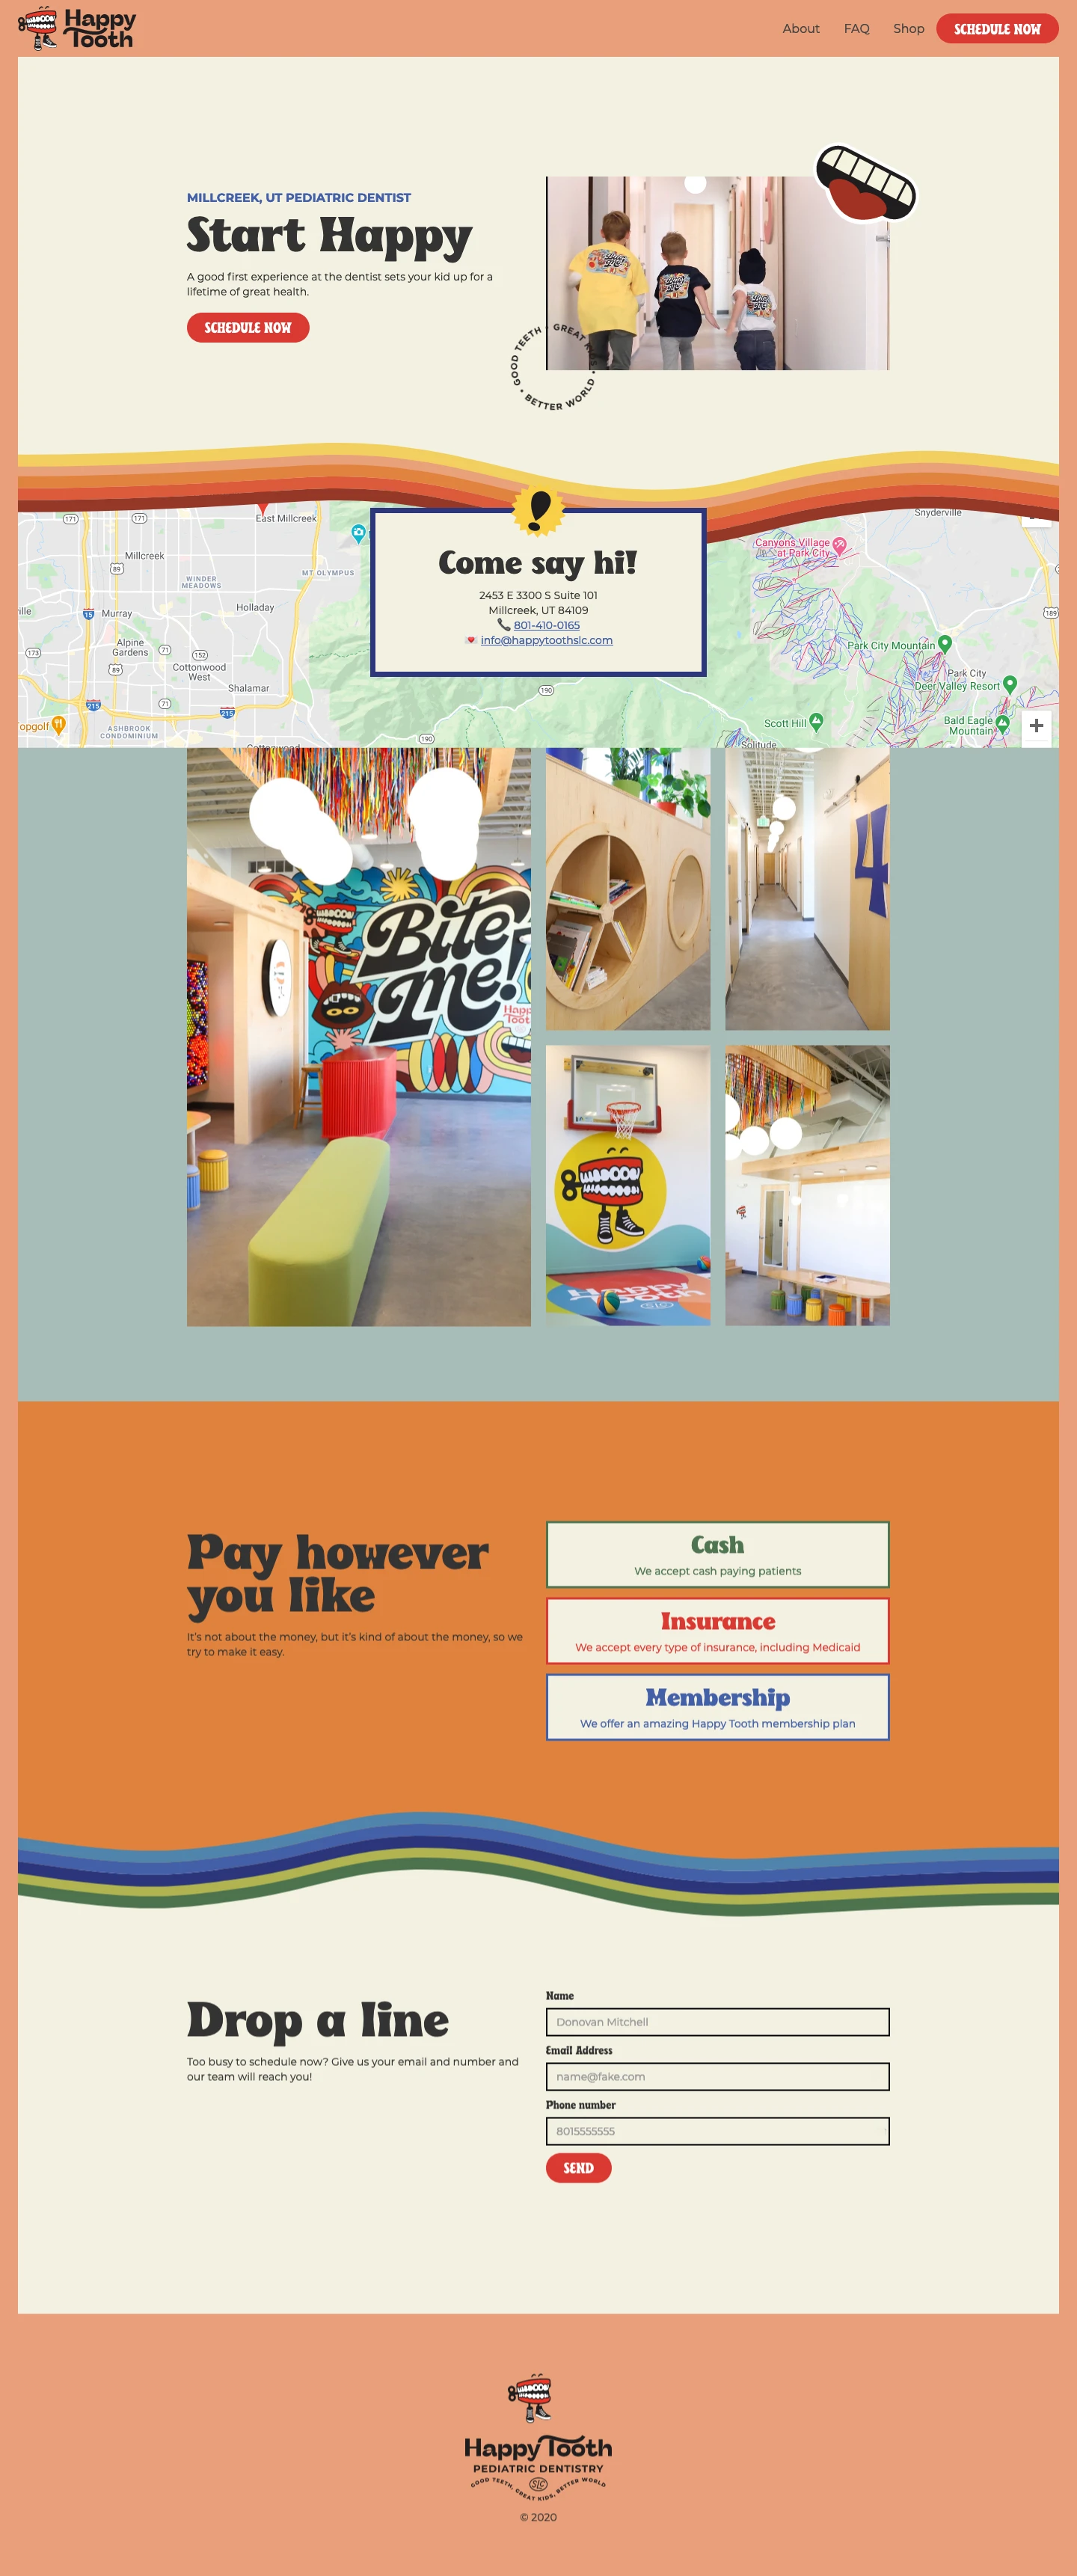 Happy Tooth Landing Page Example: A fun place for fun kids in Salt Lake City, UT. Dr. Tyler Hanks makes sure your kids have a happy start at the dentist.